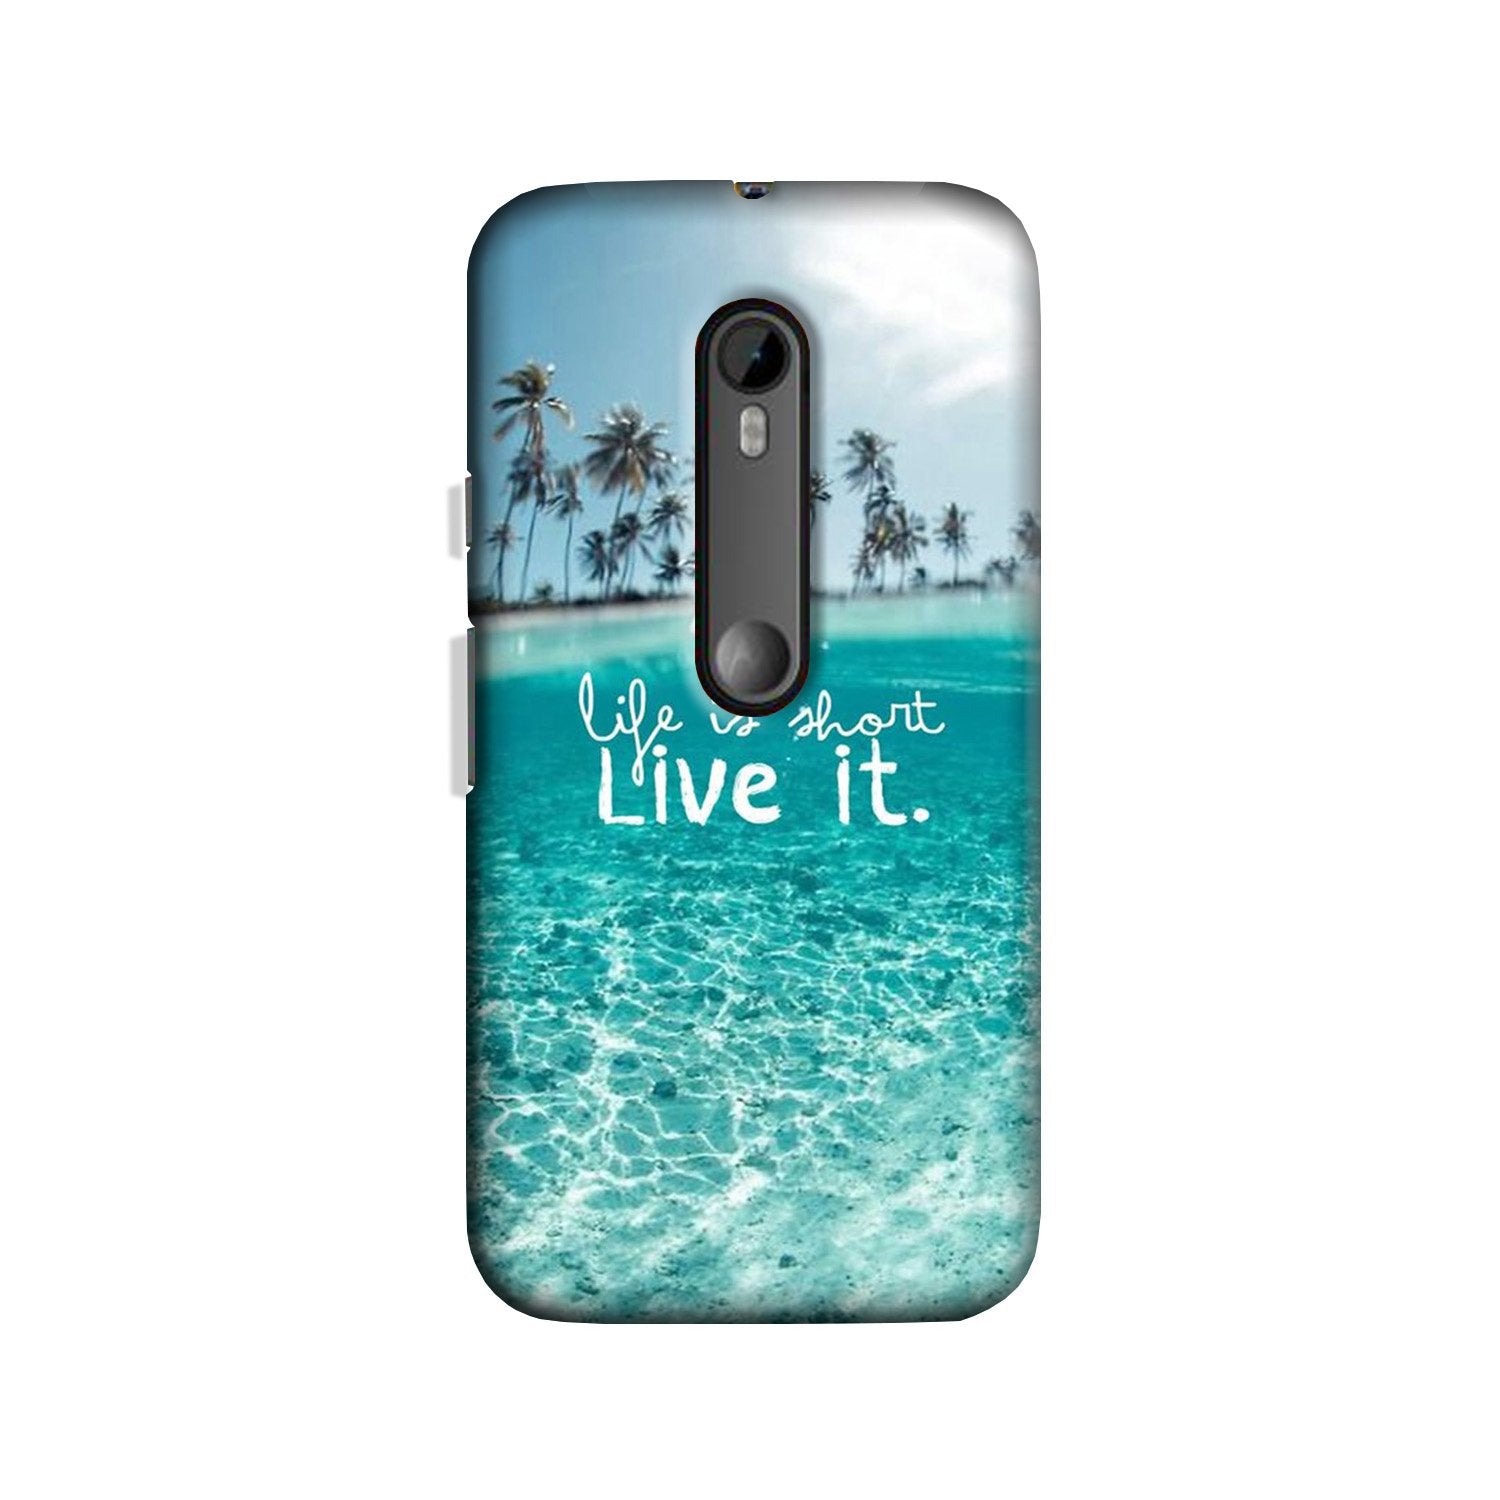 Life is short live it Case for Moto G3